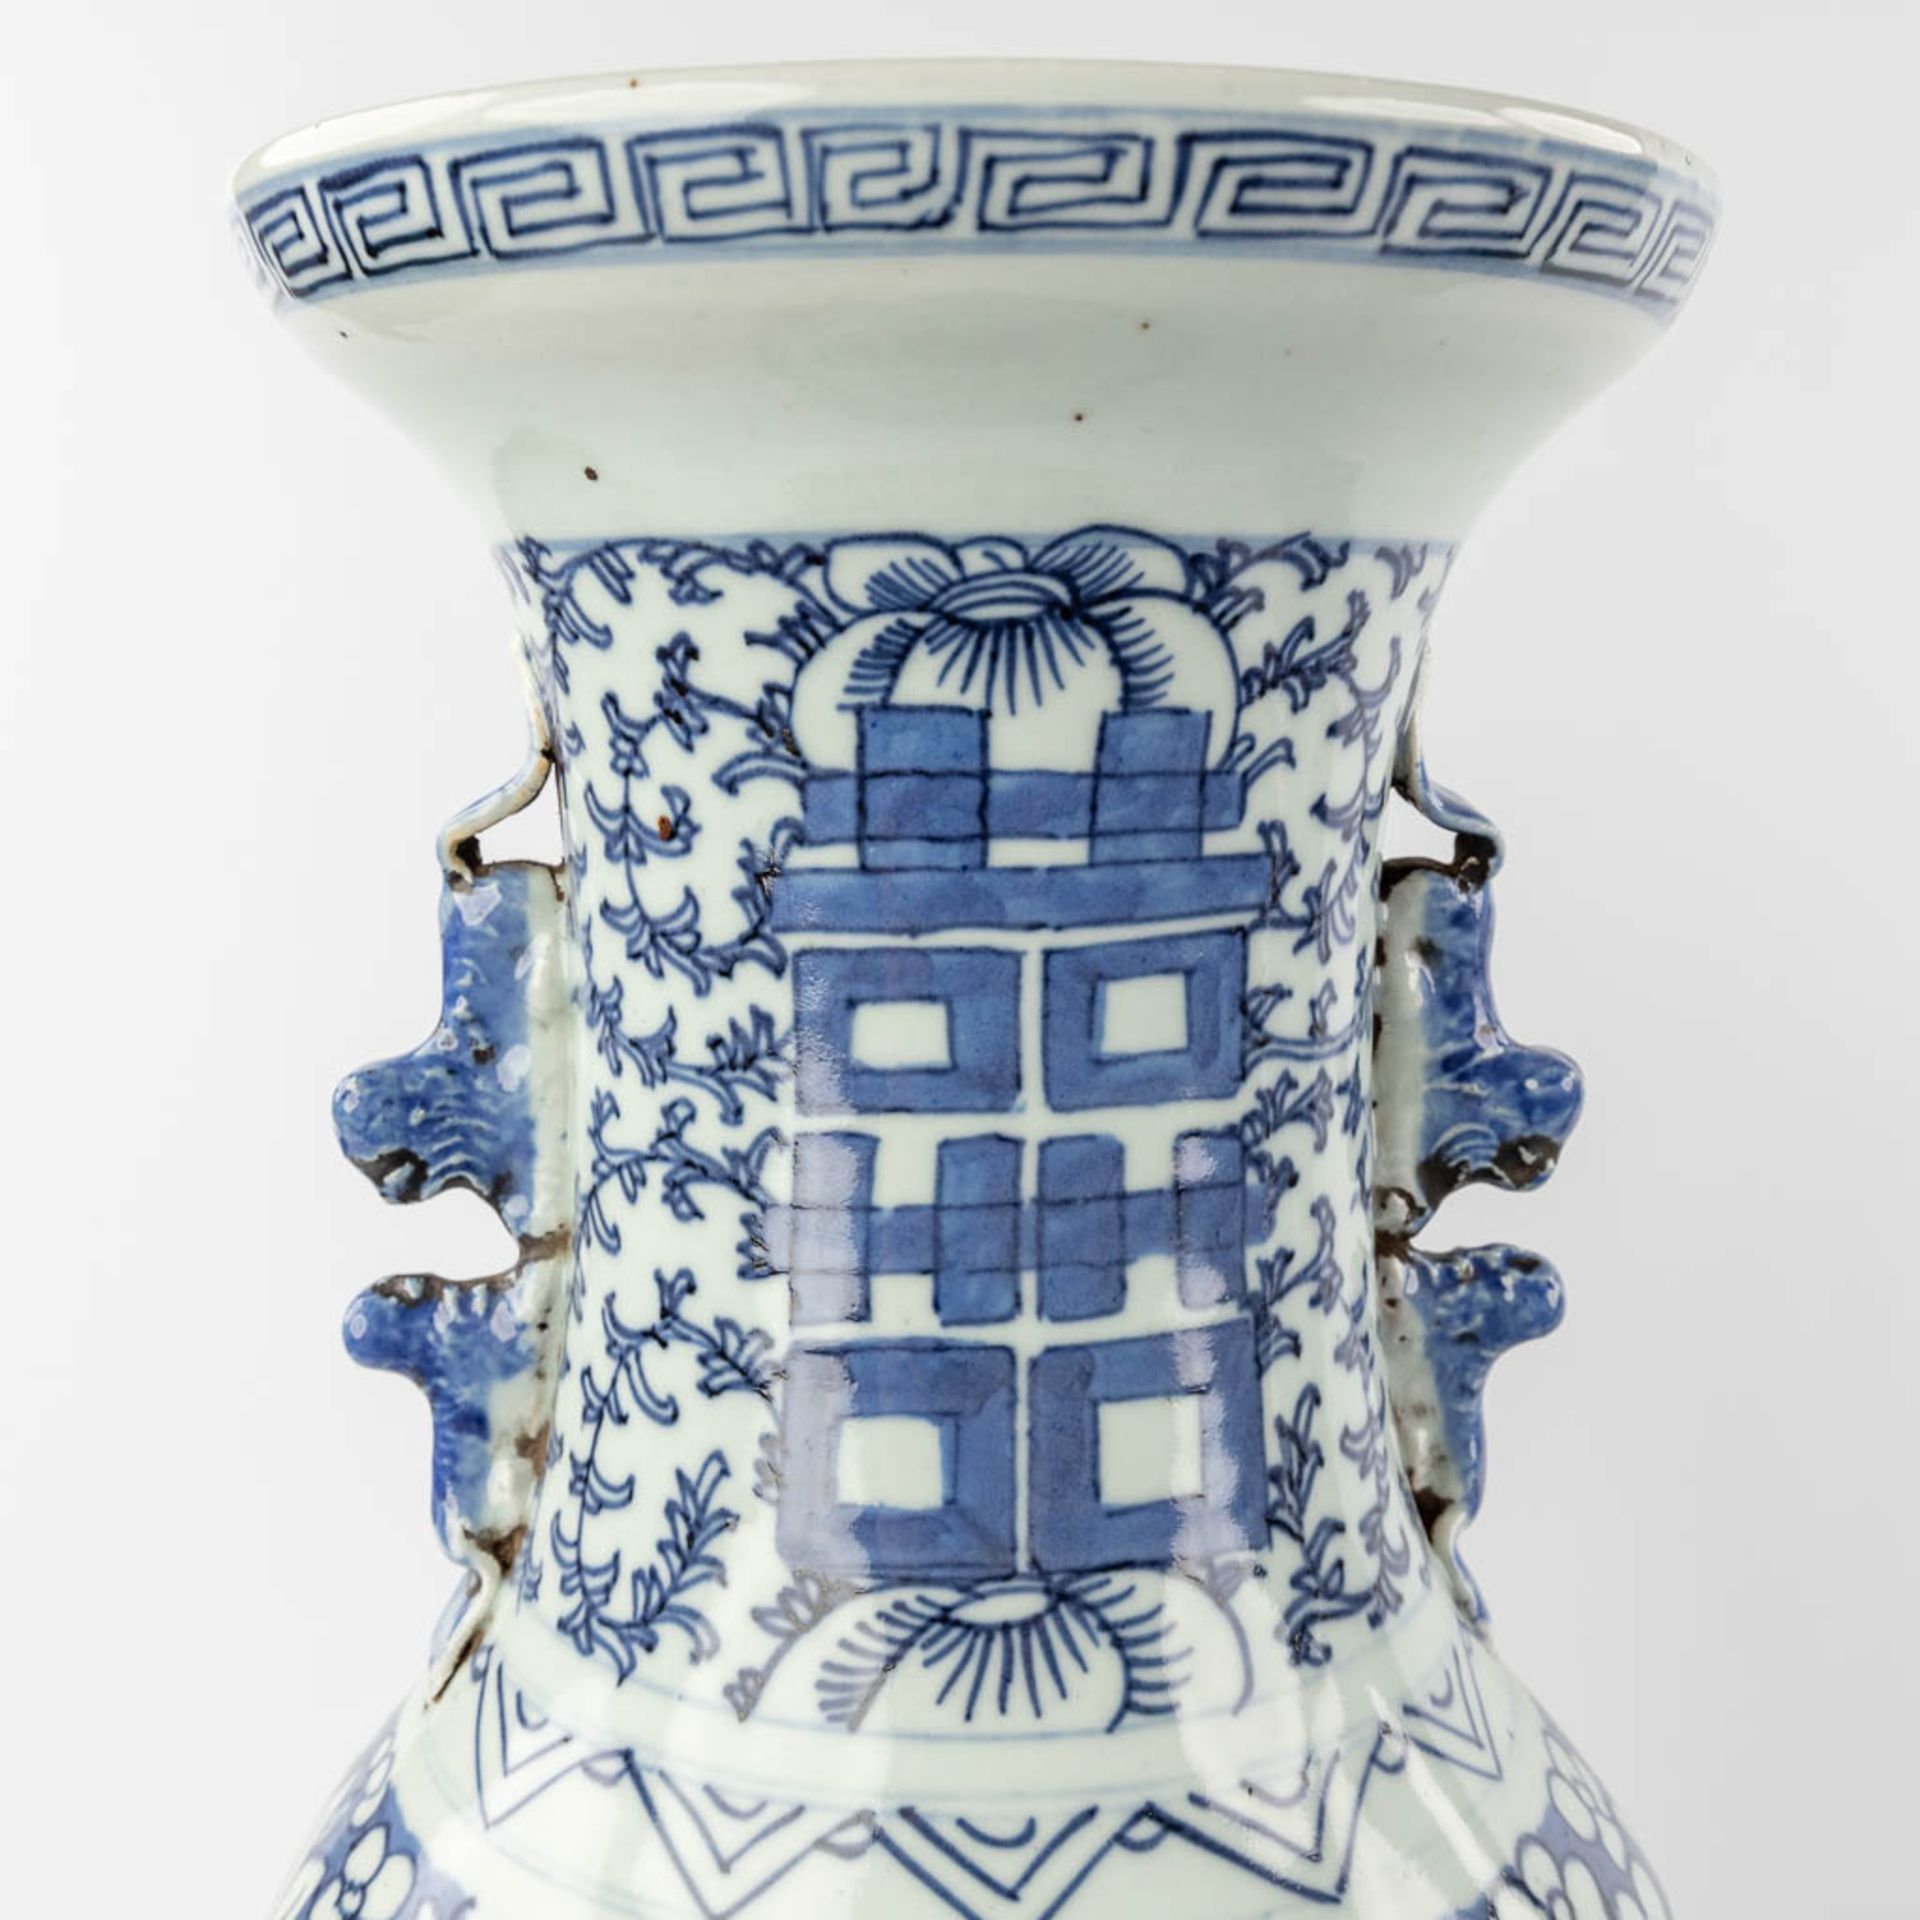 Two Chinese vases with blue-white double xi-sign of happiness. 19th/20th C. (H:60 x D:21 cm) - Image 11 of 12